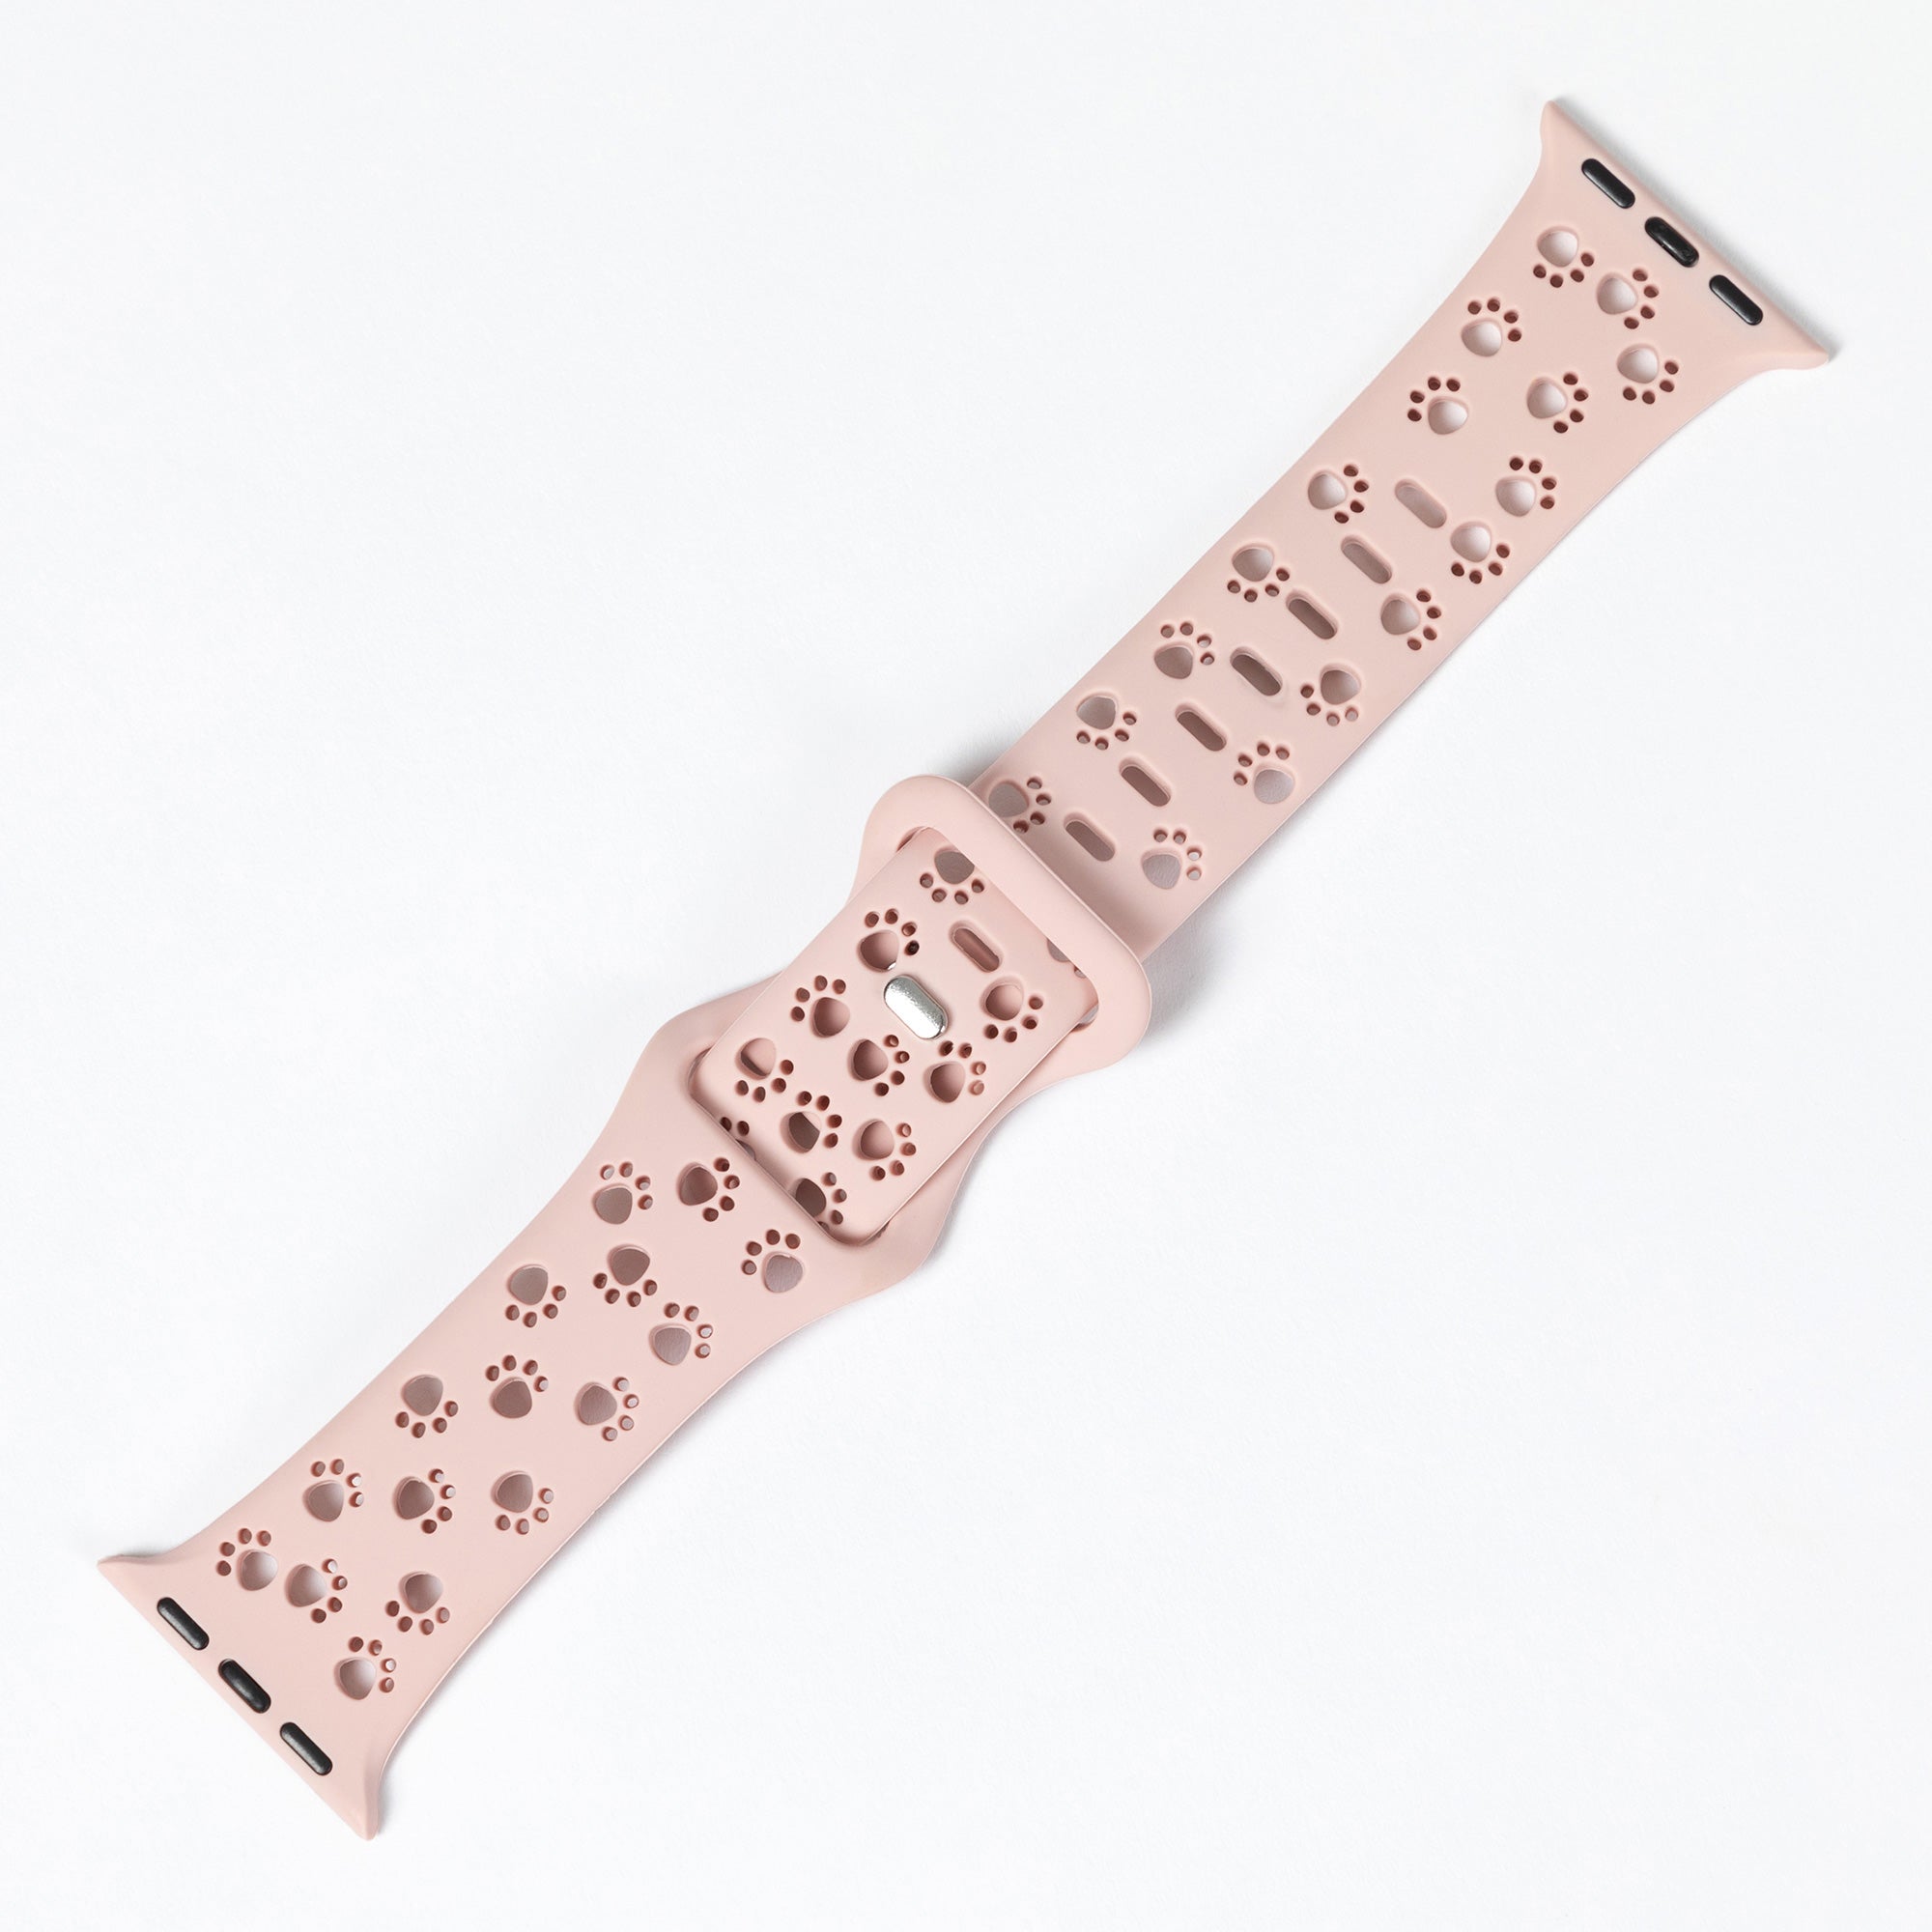 Patterned Silicone Apple Watch Band 38mm/40mm 42mm/44mm - Cut Out Paws - Pink - 42mm/44mm